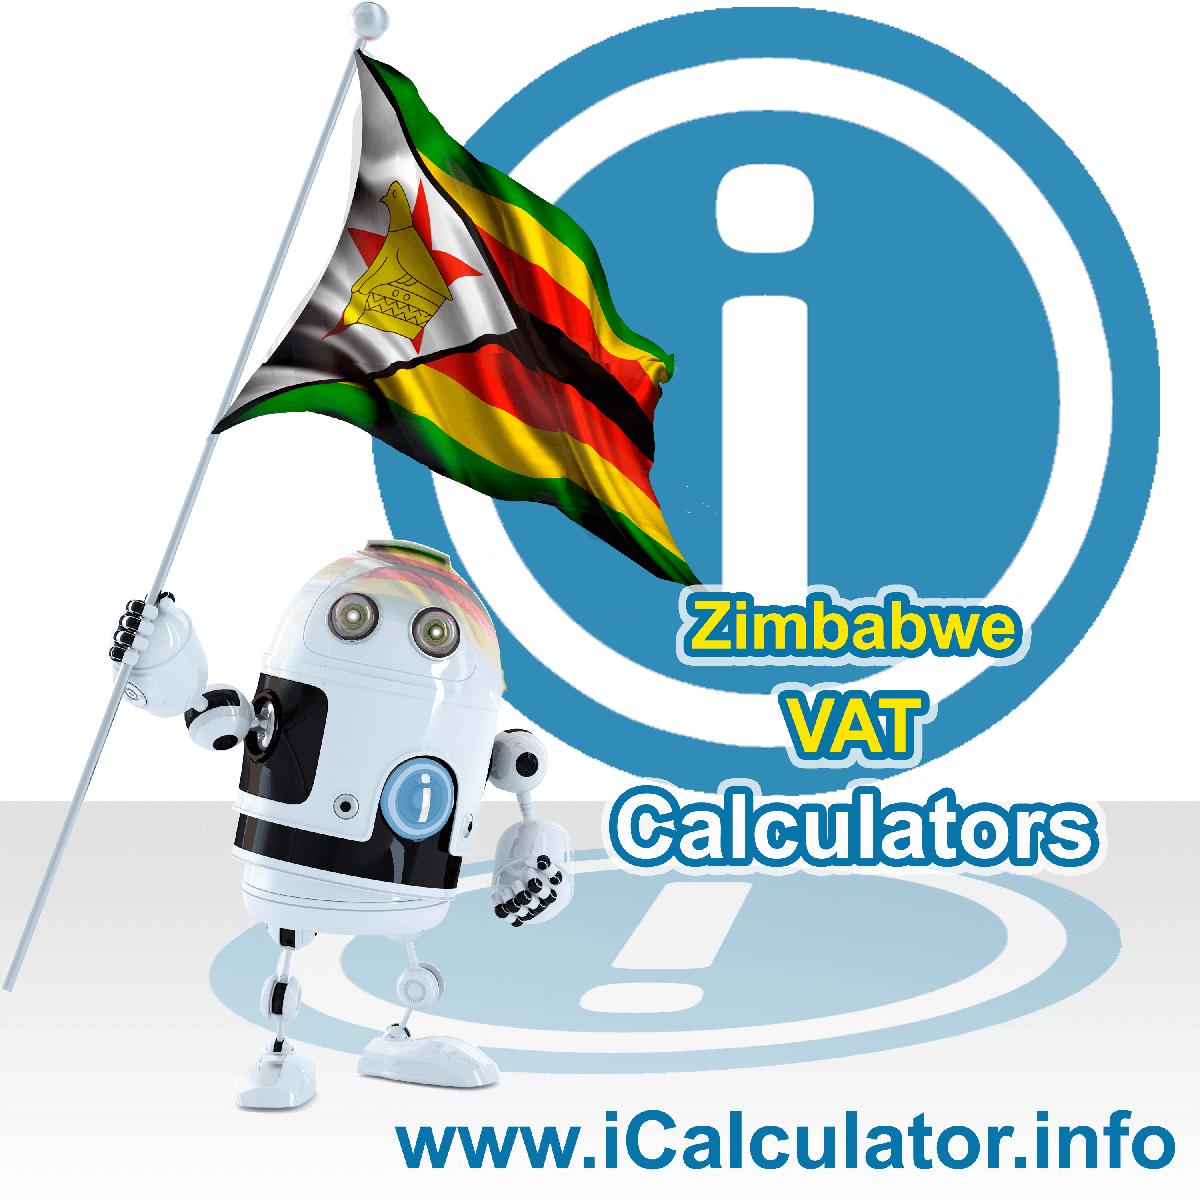 Zimbabwe VAT Calculator. This image shows the Zimbabwe flag and information relating to the VAT formula used for calculating Value Added Tax in Zimbabwe using the Zimbabwe VAT Calculator in 2023